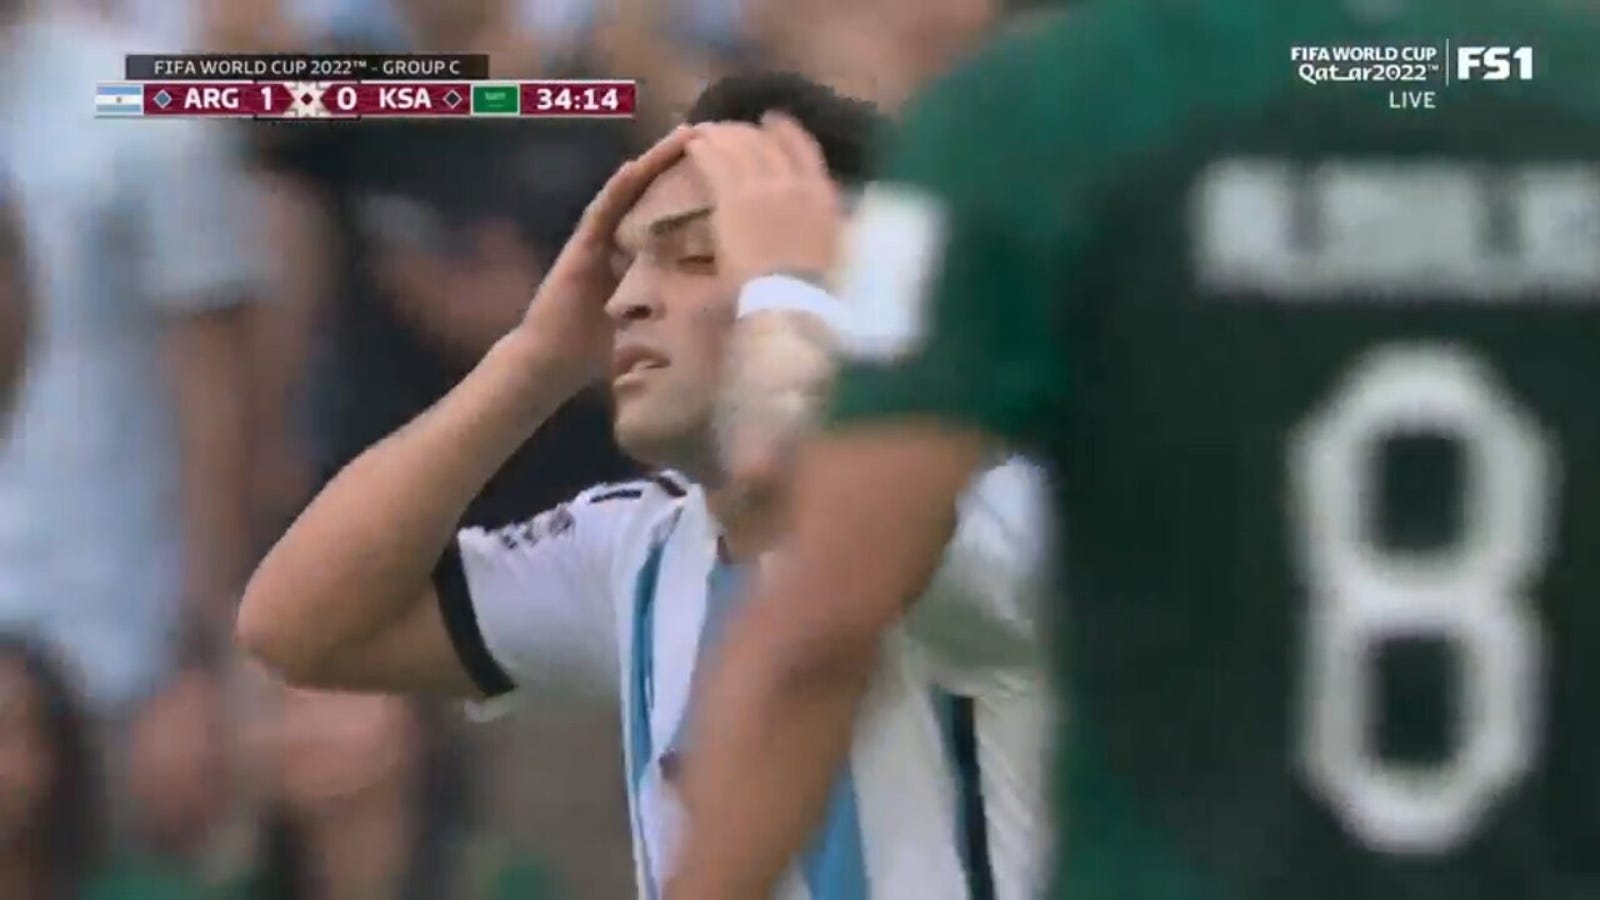 Argentina caught offside seven total times in the first half vs.  Saudi Arabia